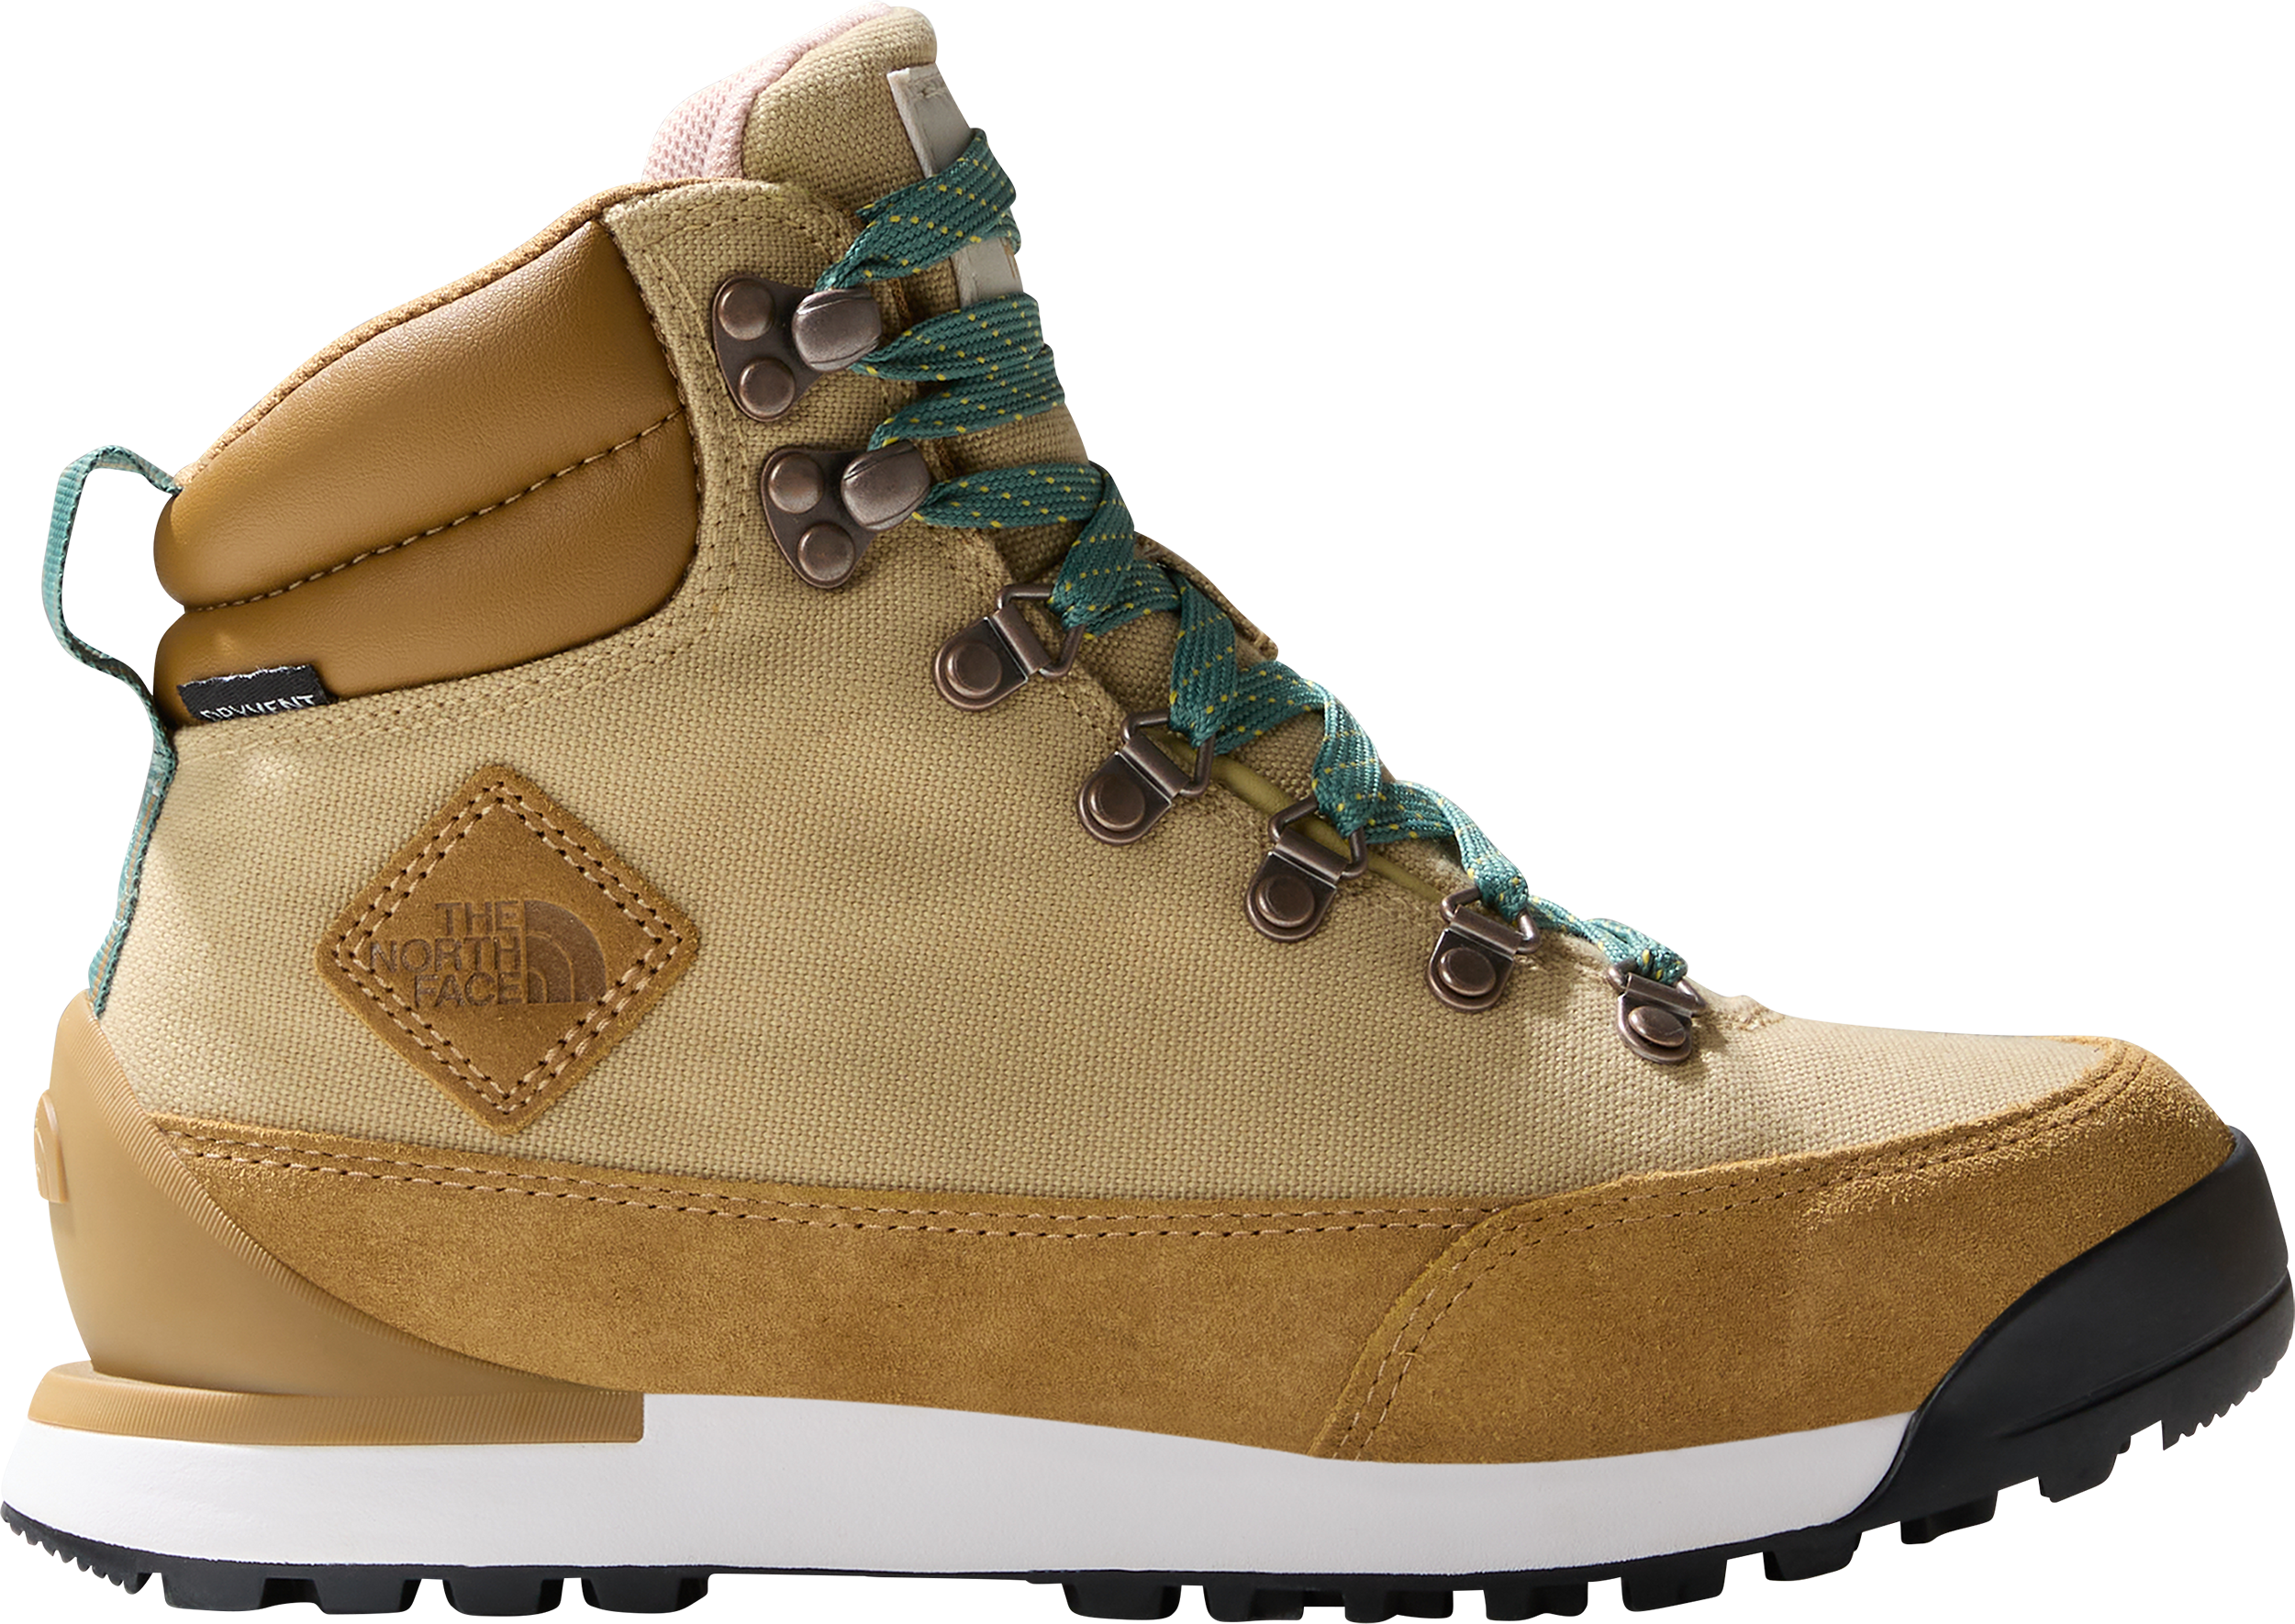 The North Face Women’s Back-to-Berkeley IV Textile Lifestyle Boots KHAKI STONE/UTILITY BROWN